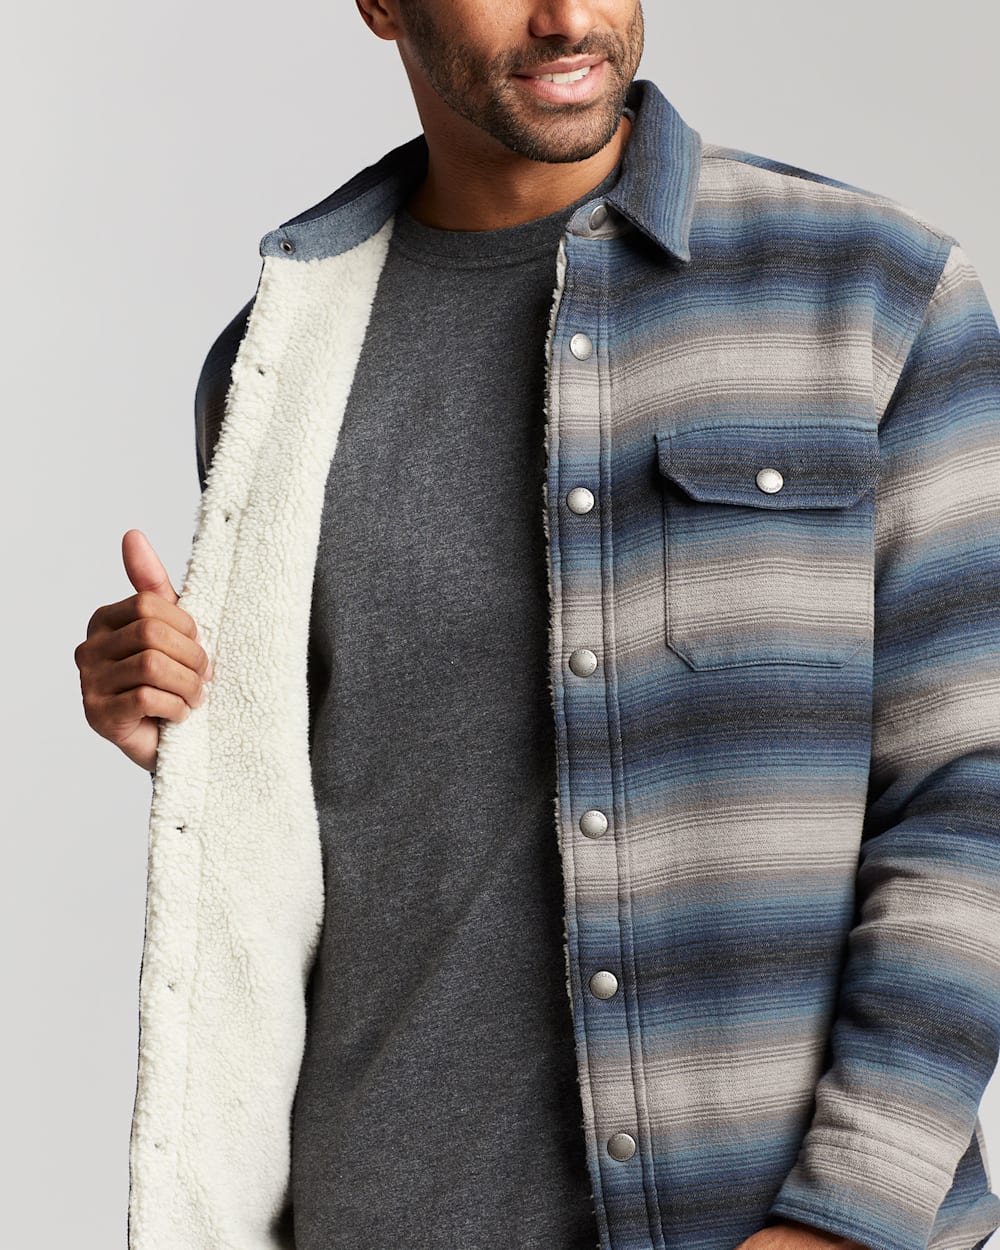 ALTERNATE VIEW OF MEN'S STRIPED SHERPA-LINED SHIRT JACKET IN BLACK/BLUE/GREY image number 2